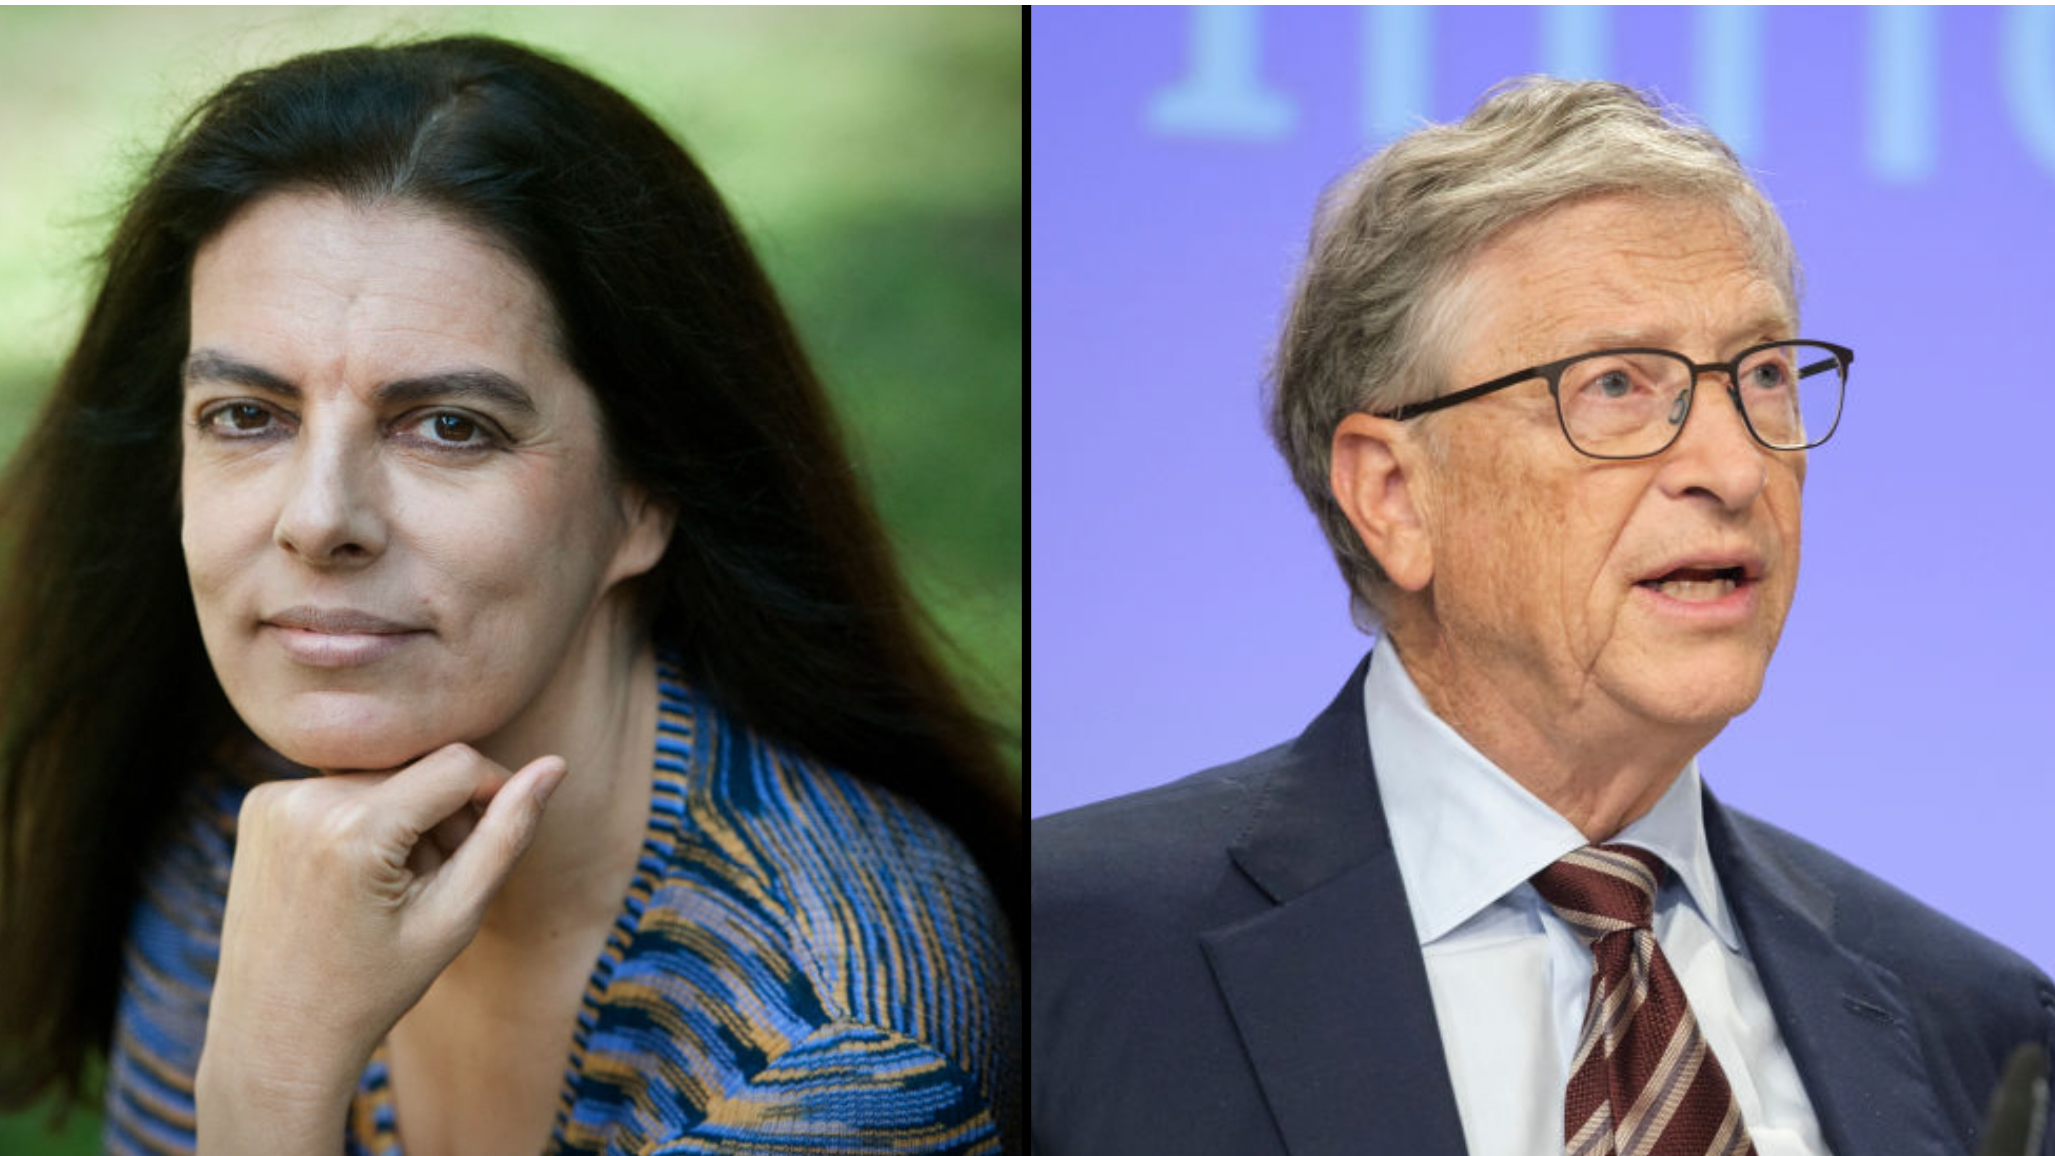 Reddit user gets Bill Gates as her Secret Santa, and she's 'blown away' by  the awesome gifts he sent – GeekWire